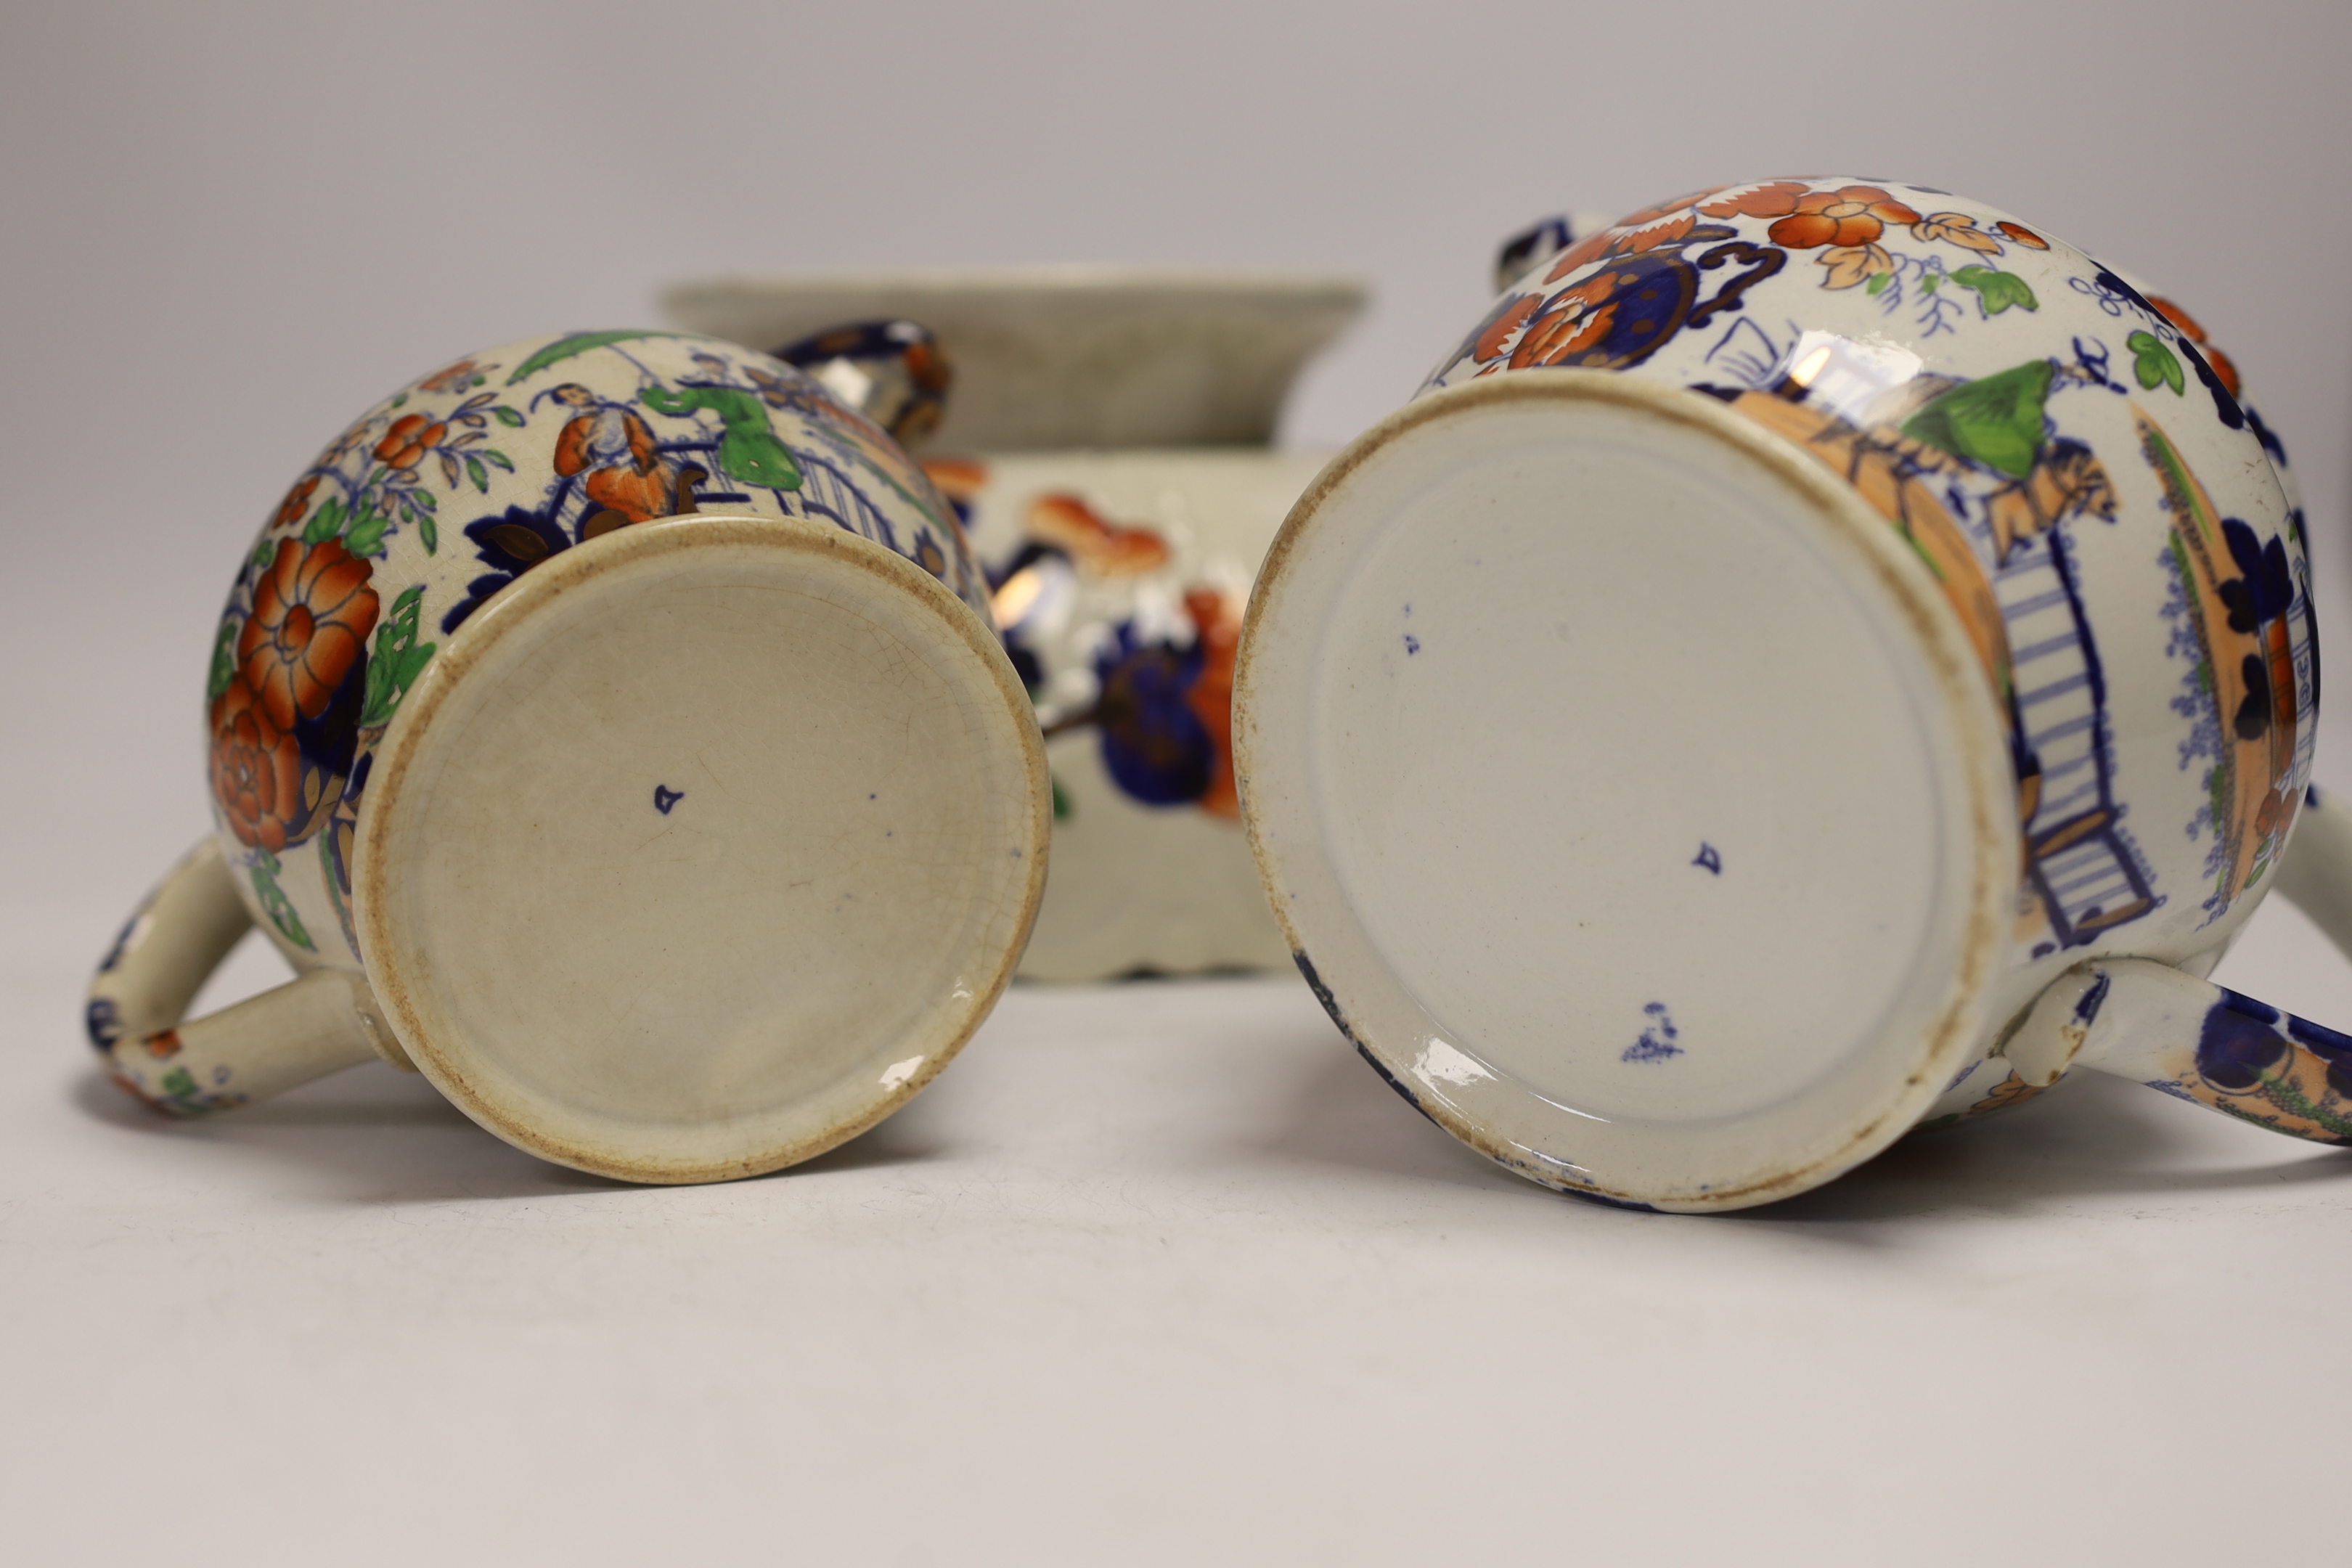 Five Welsh ‘Gaudy’ coffee cans, a large pedestal bowl and two Staffordshire jugs, bowl 21cm diameter